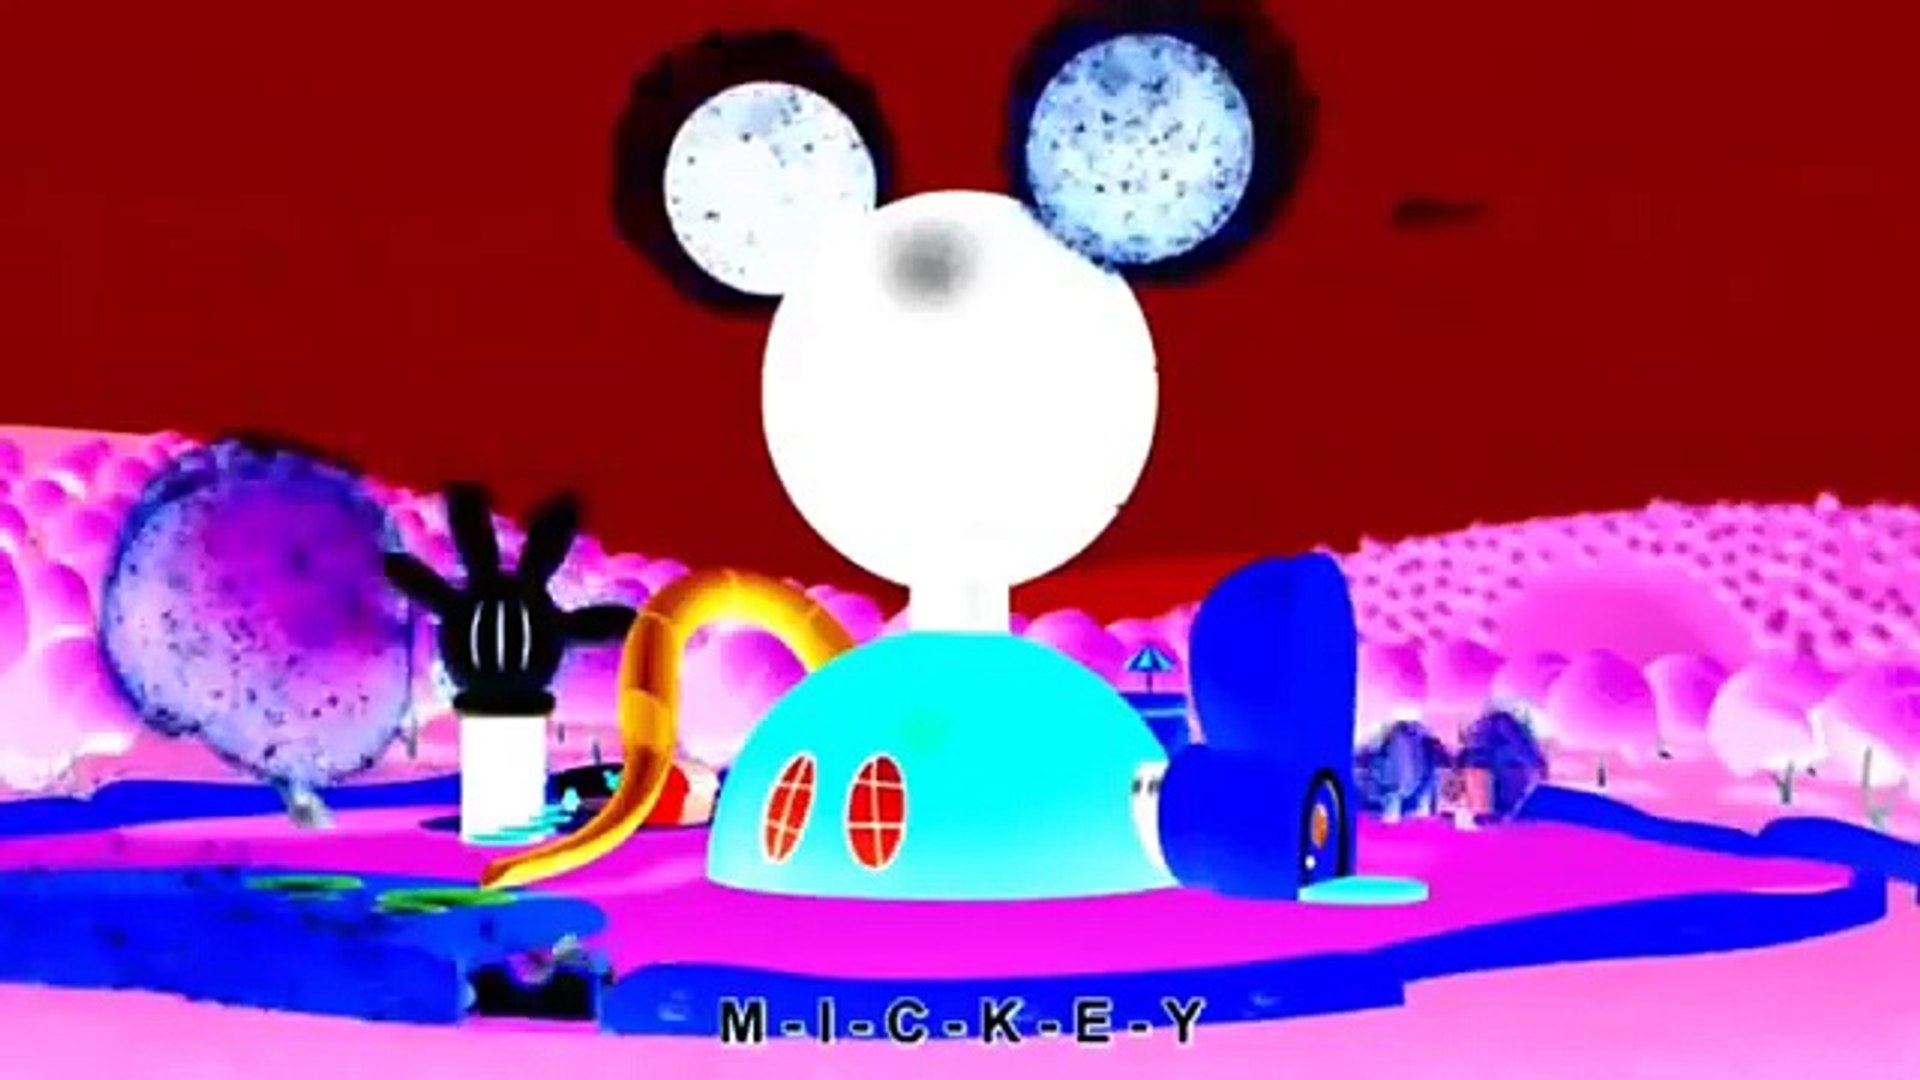 Mickey Mouse Clubhouse Theme in G Major Slow - Dailymotion Video